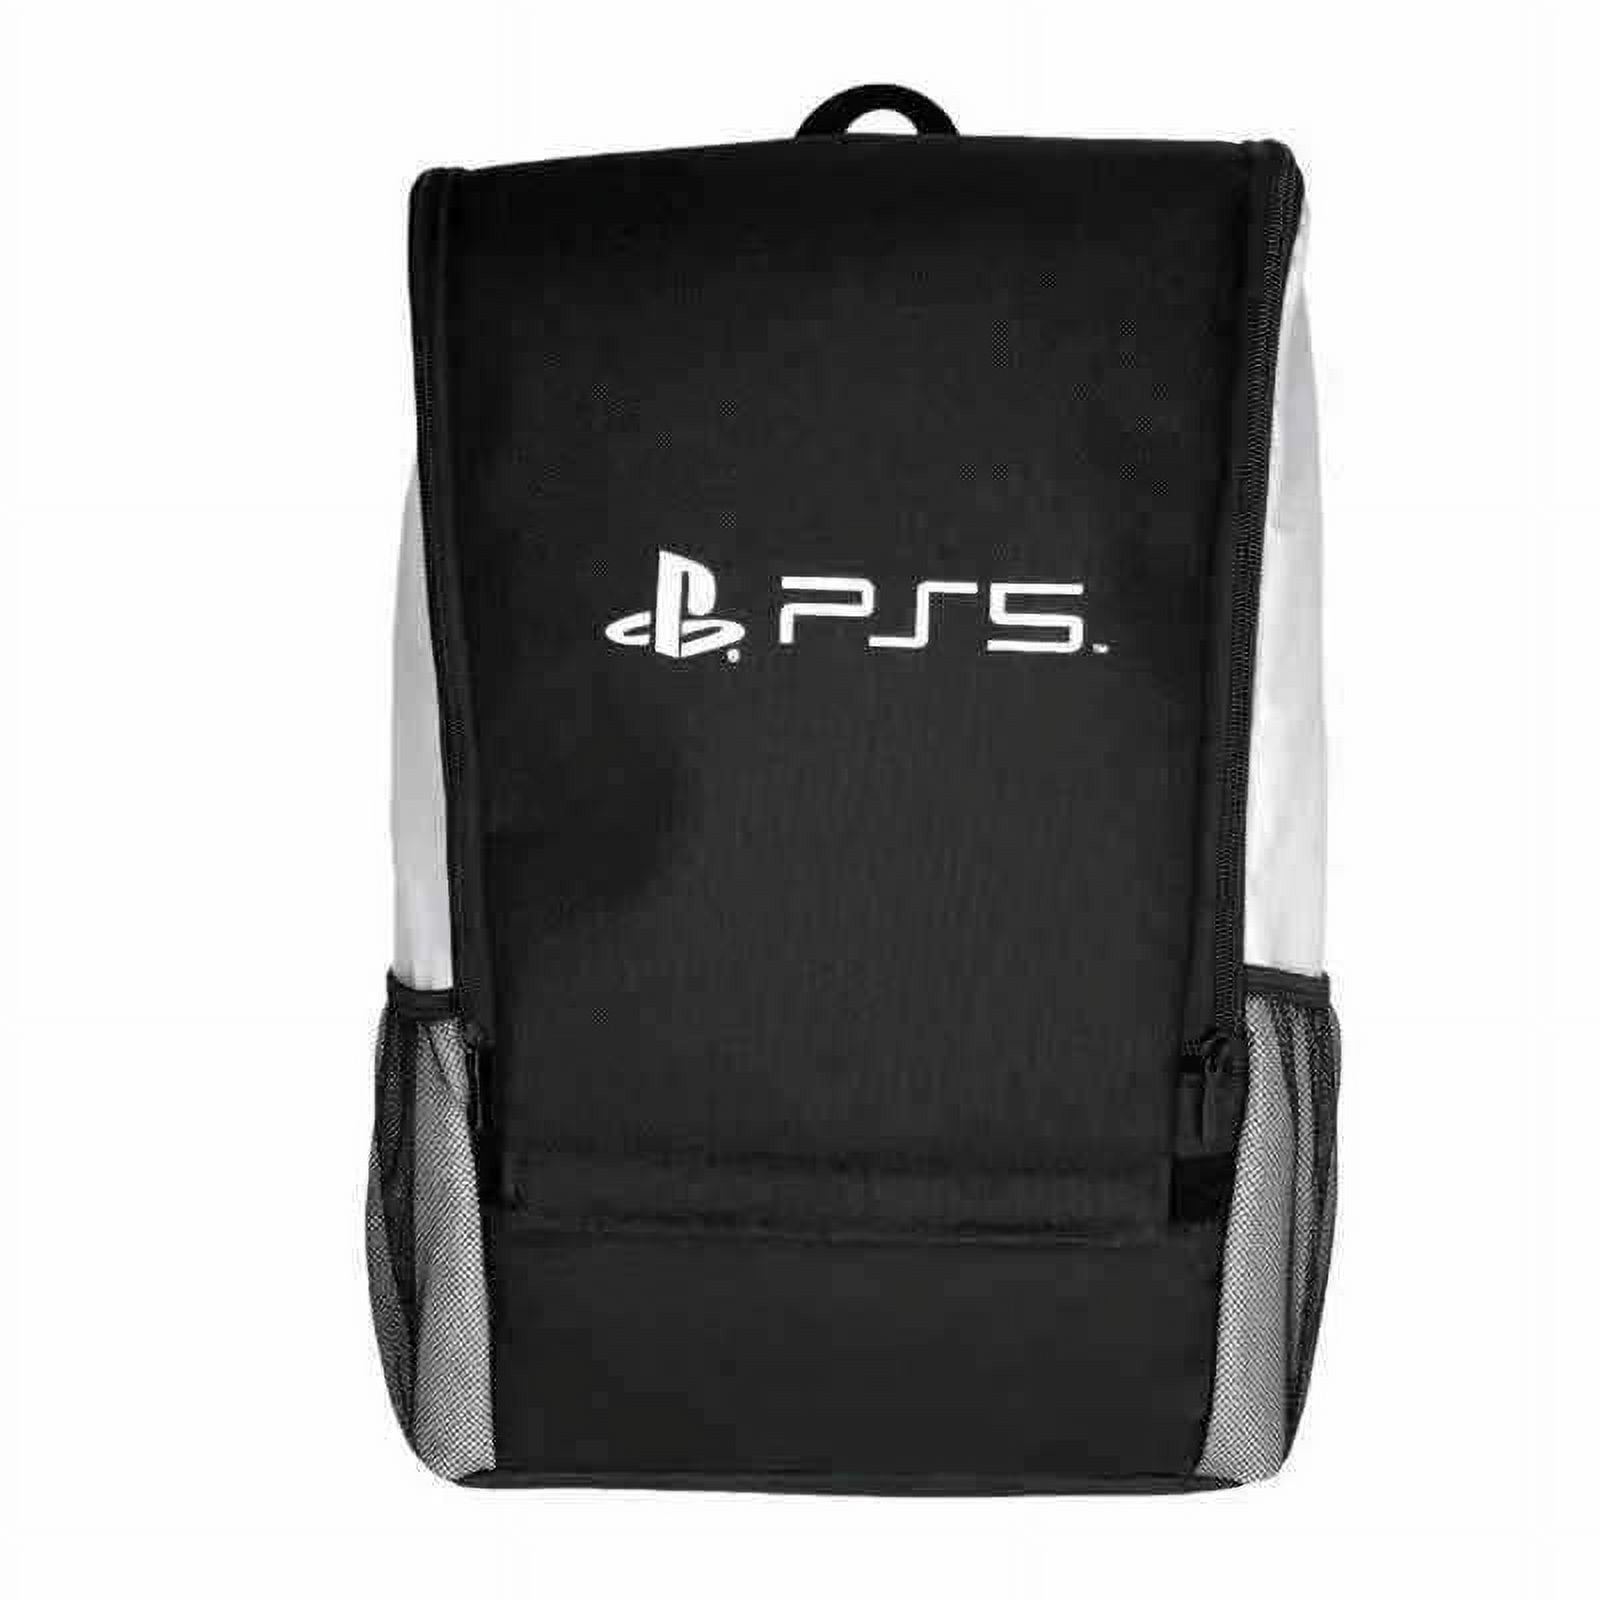 PlayStation 3 Carrying Case Backpack - Video games & consoles